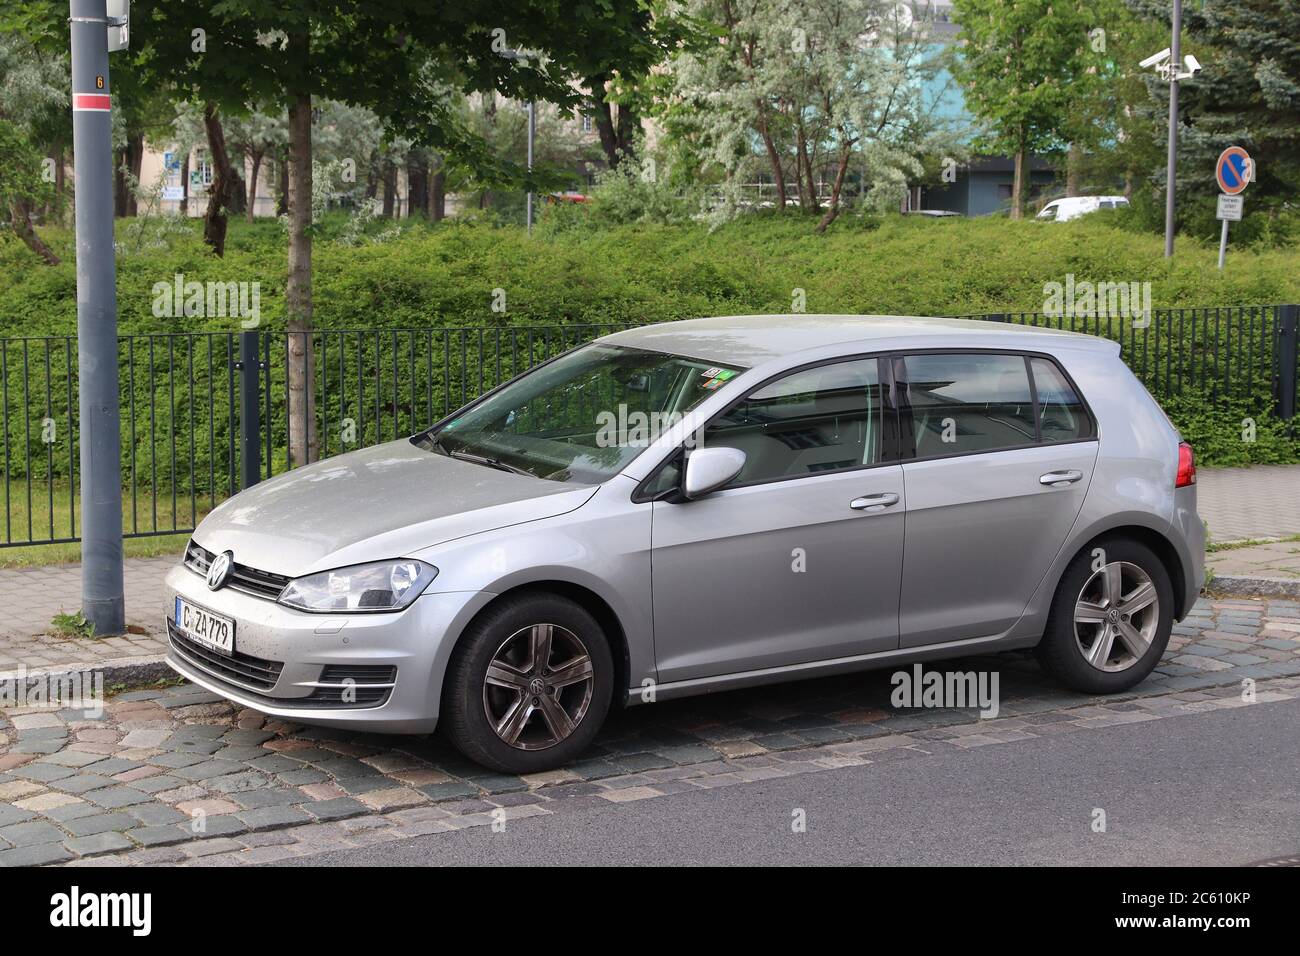 DRESDEN, GERMANY - MAY 10, 2018: Silver Volkswagen Golf compact car parked in Germany. There were 45.8 million cars registered in Germany (as of 2017) Stock Photo